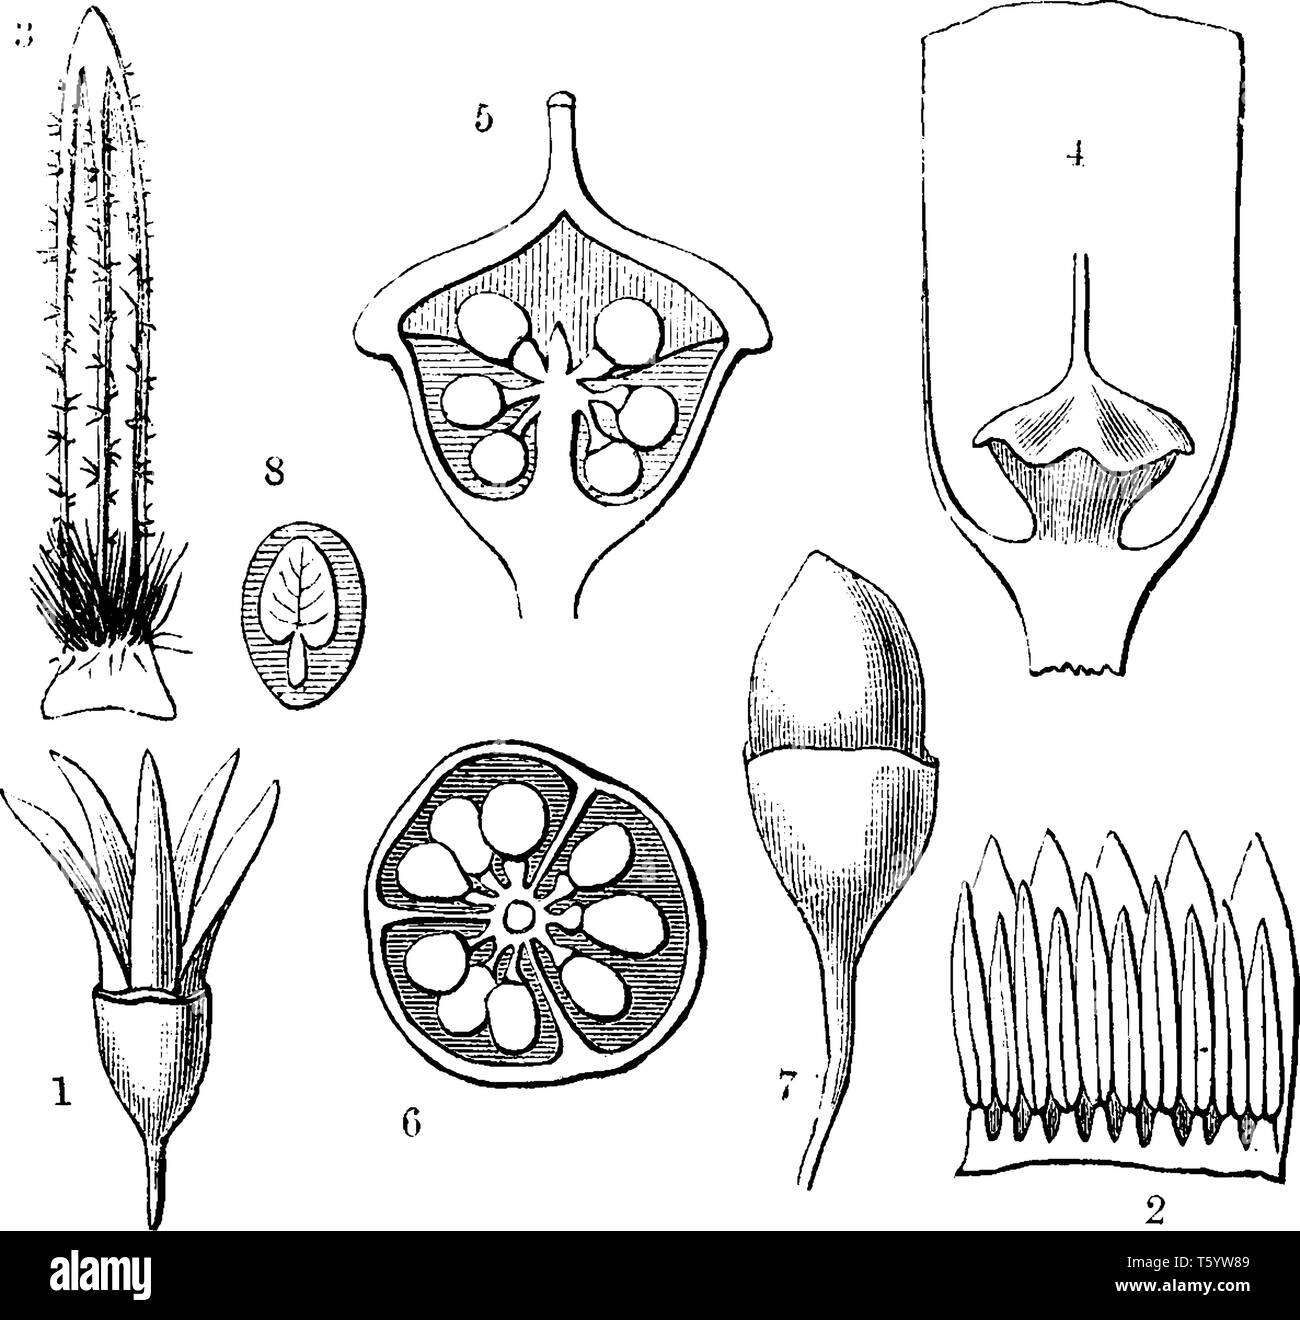 A picture showing the different parts of Styrax leiophylla tree. The parts includes a flower, stamen, ovary, ripe fruit and longitudinal section of se Stock Vector